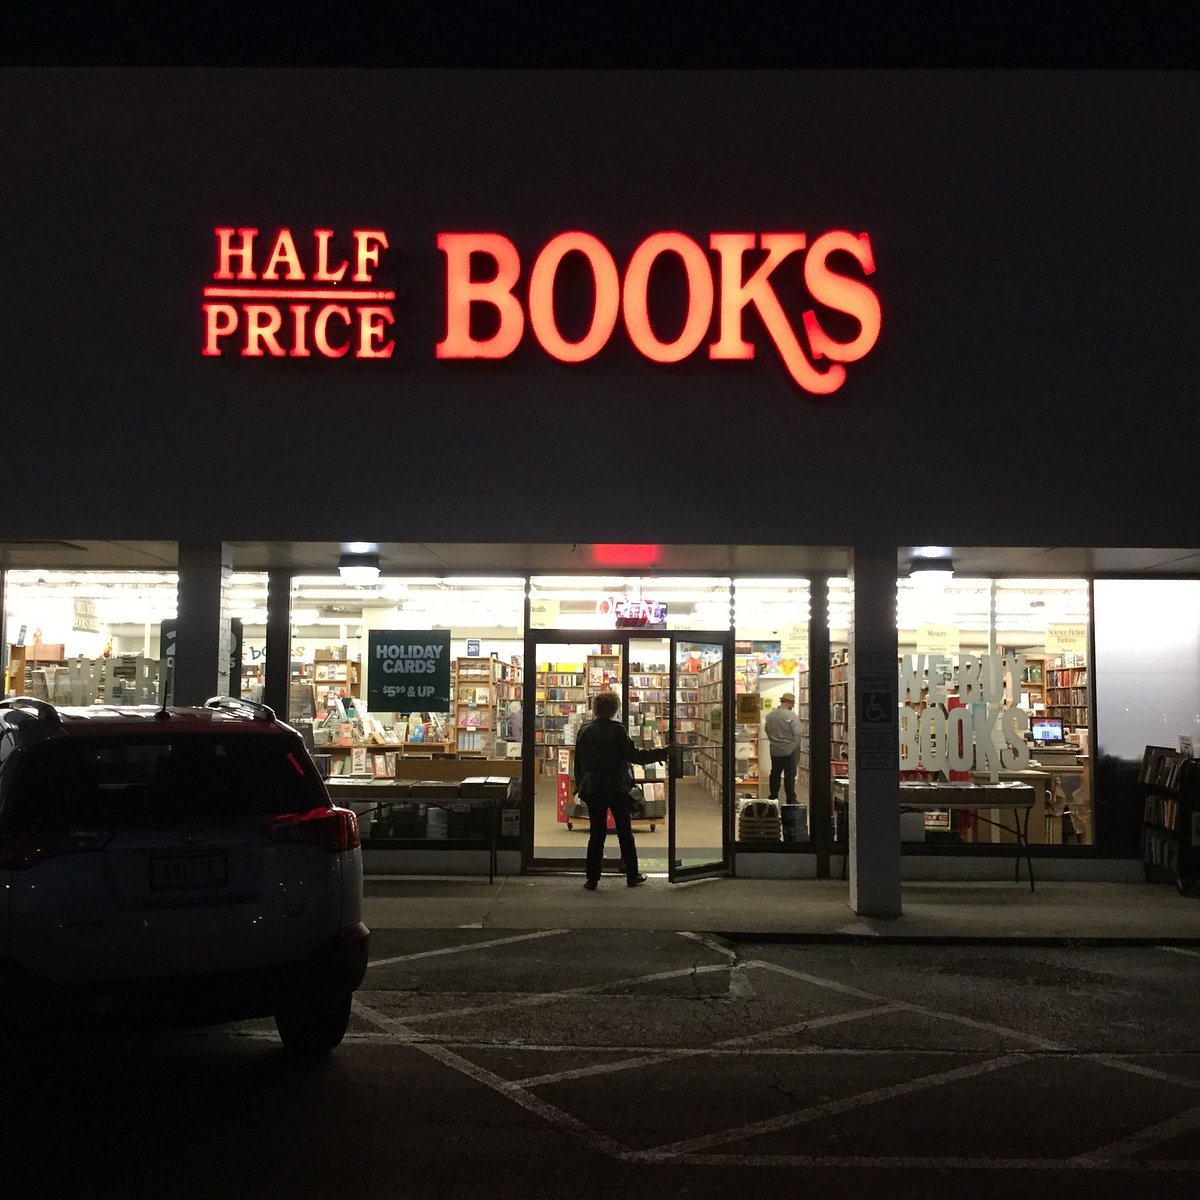 HALF PRICE BOOKS (North Olmsted) All You Need to Know BEFORE You Go